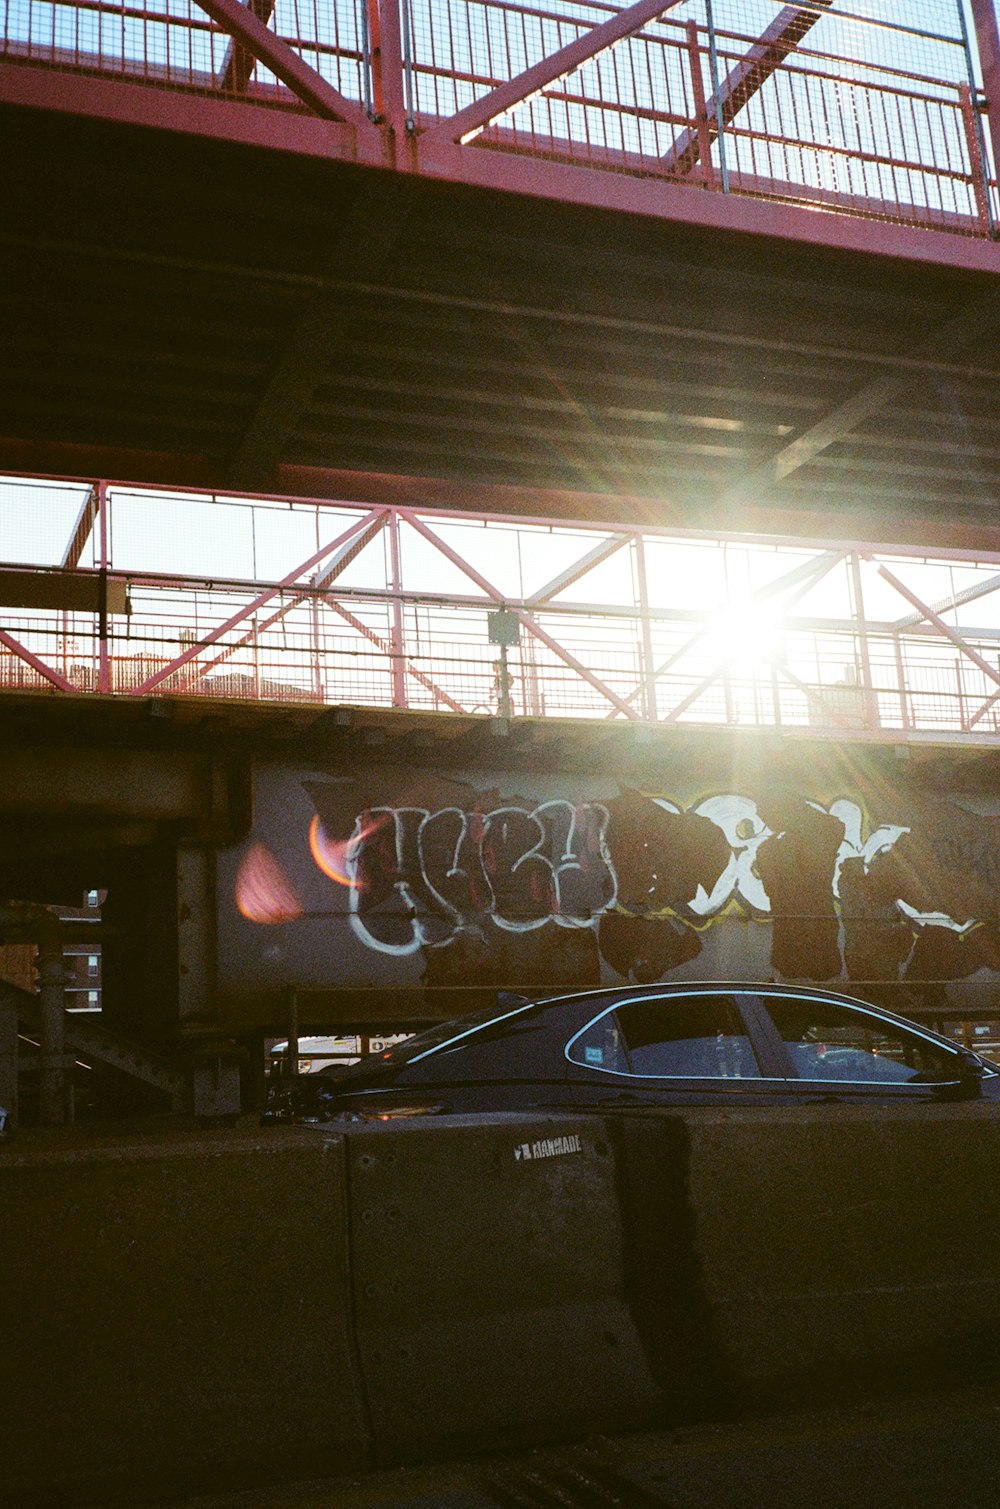 a car parked under a bridge with graffiti on it